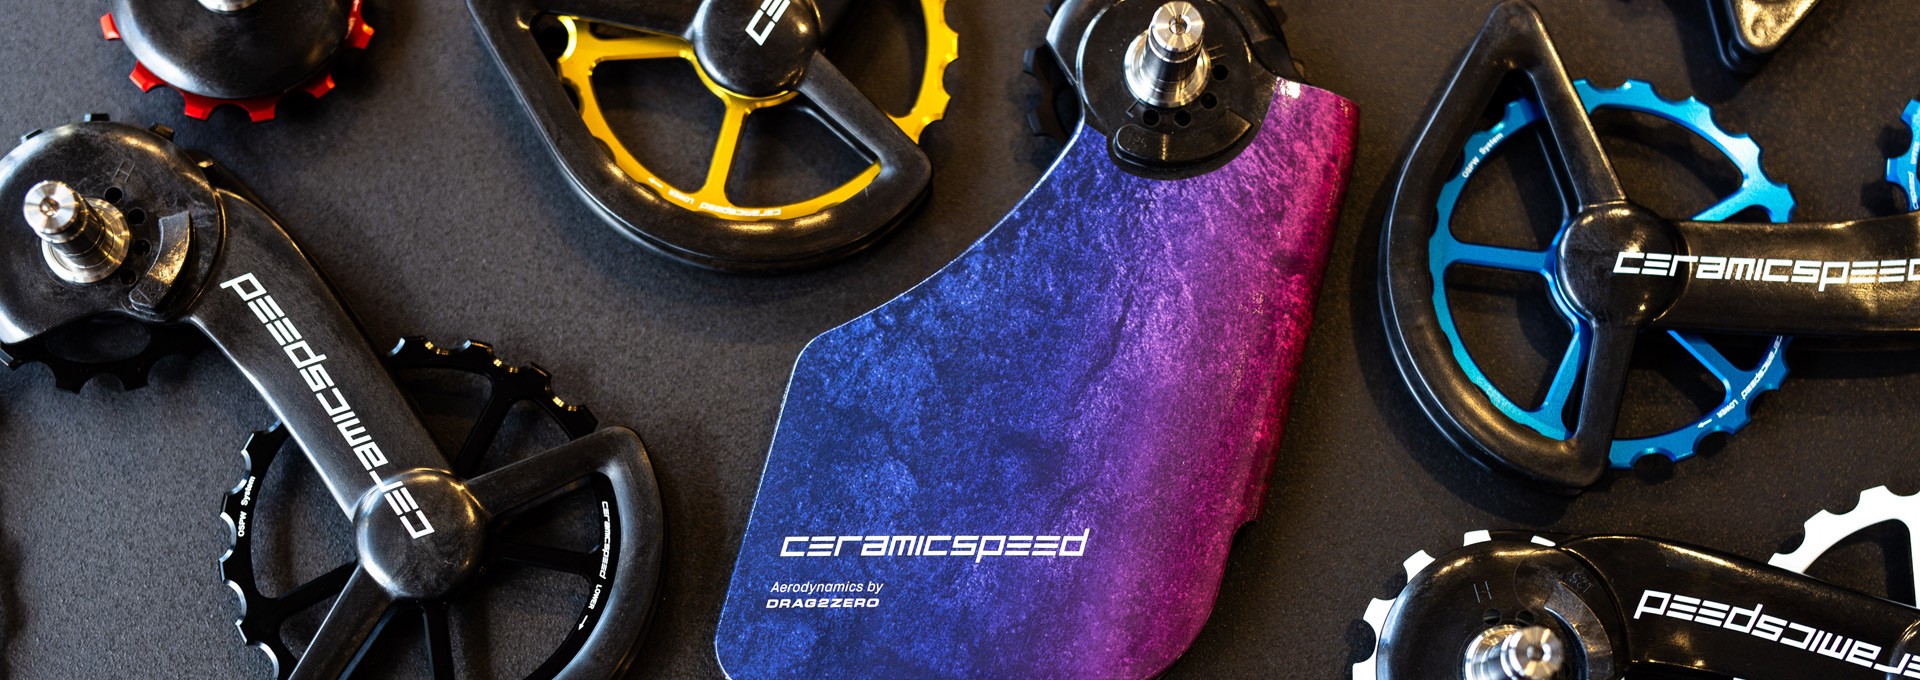 How Does CeramicSpeed Make You Faster?